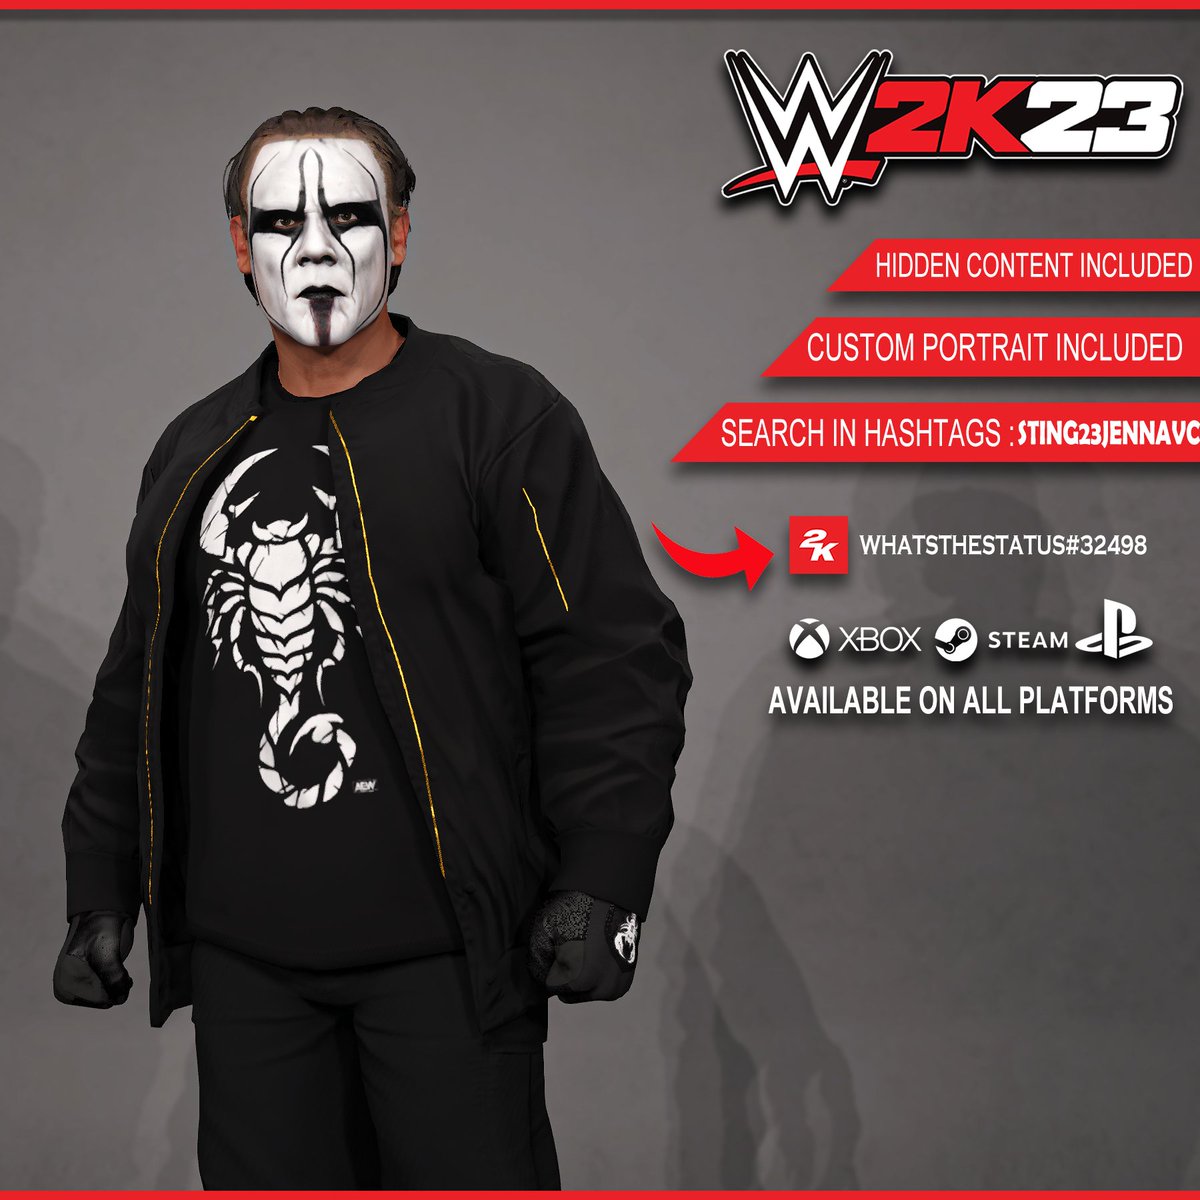 Sting (@sting) Uploaded to #WWE2K23 Community Creations

➠ Search In HashTags: STING23JENNAVC
★ HIDDEN VOICE ENTRANCE & TAUNTS
★ HIDDEN CROWD CHANTS
➠ Collab with
@Jena_Sting
@enzoanimal90
@BigRighteous
@Azorthious